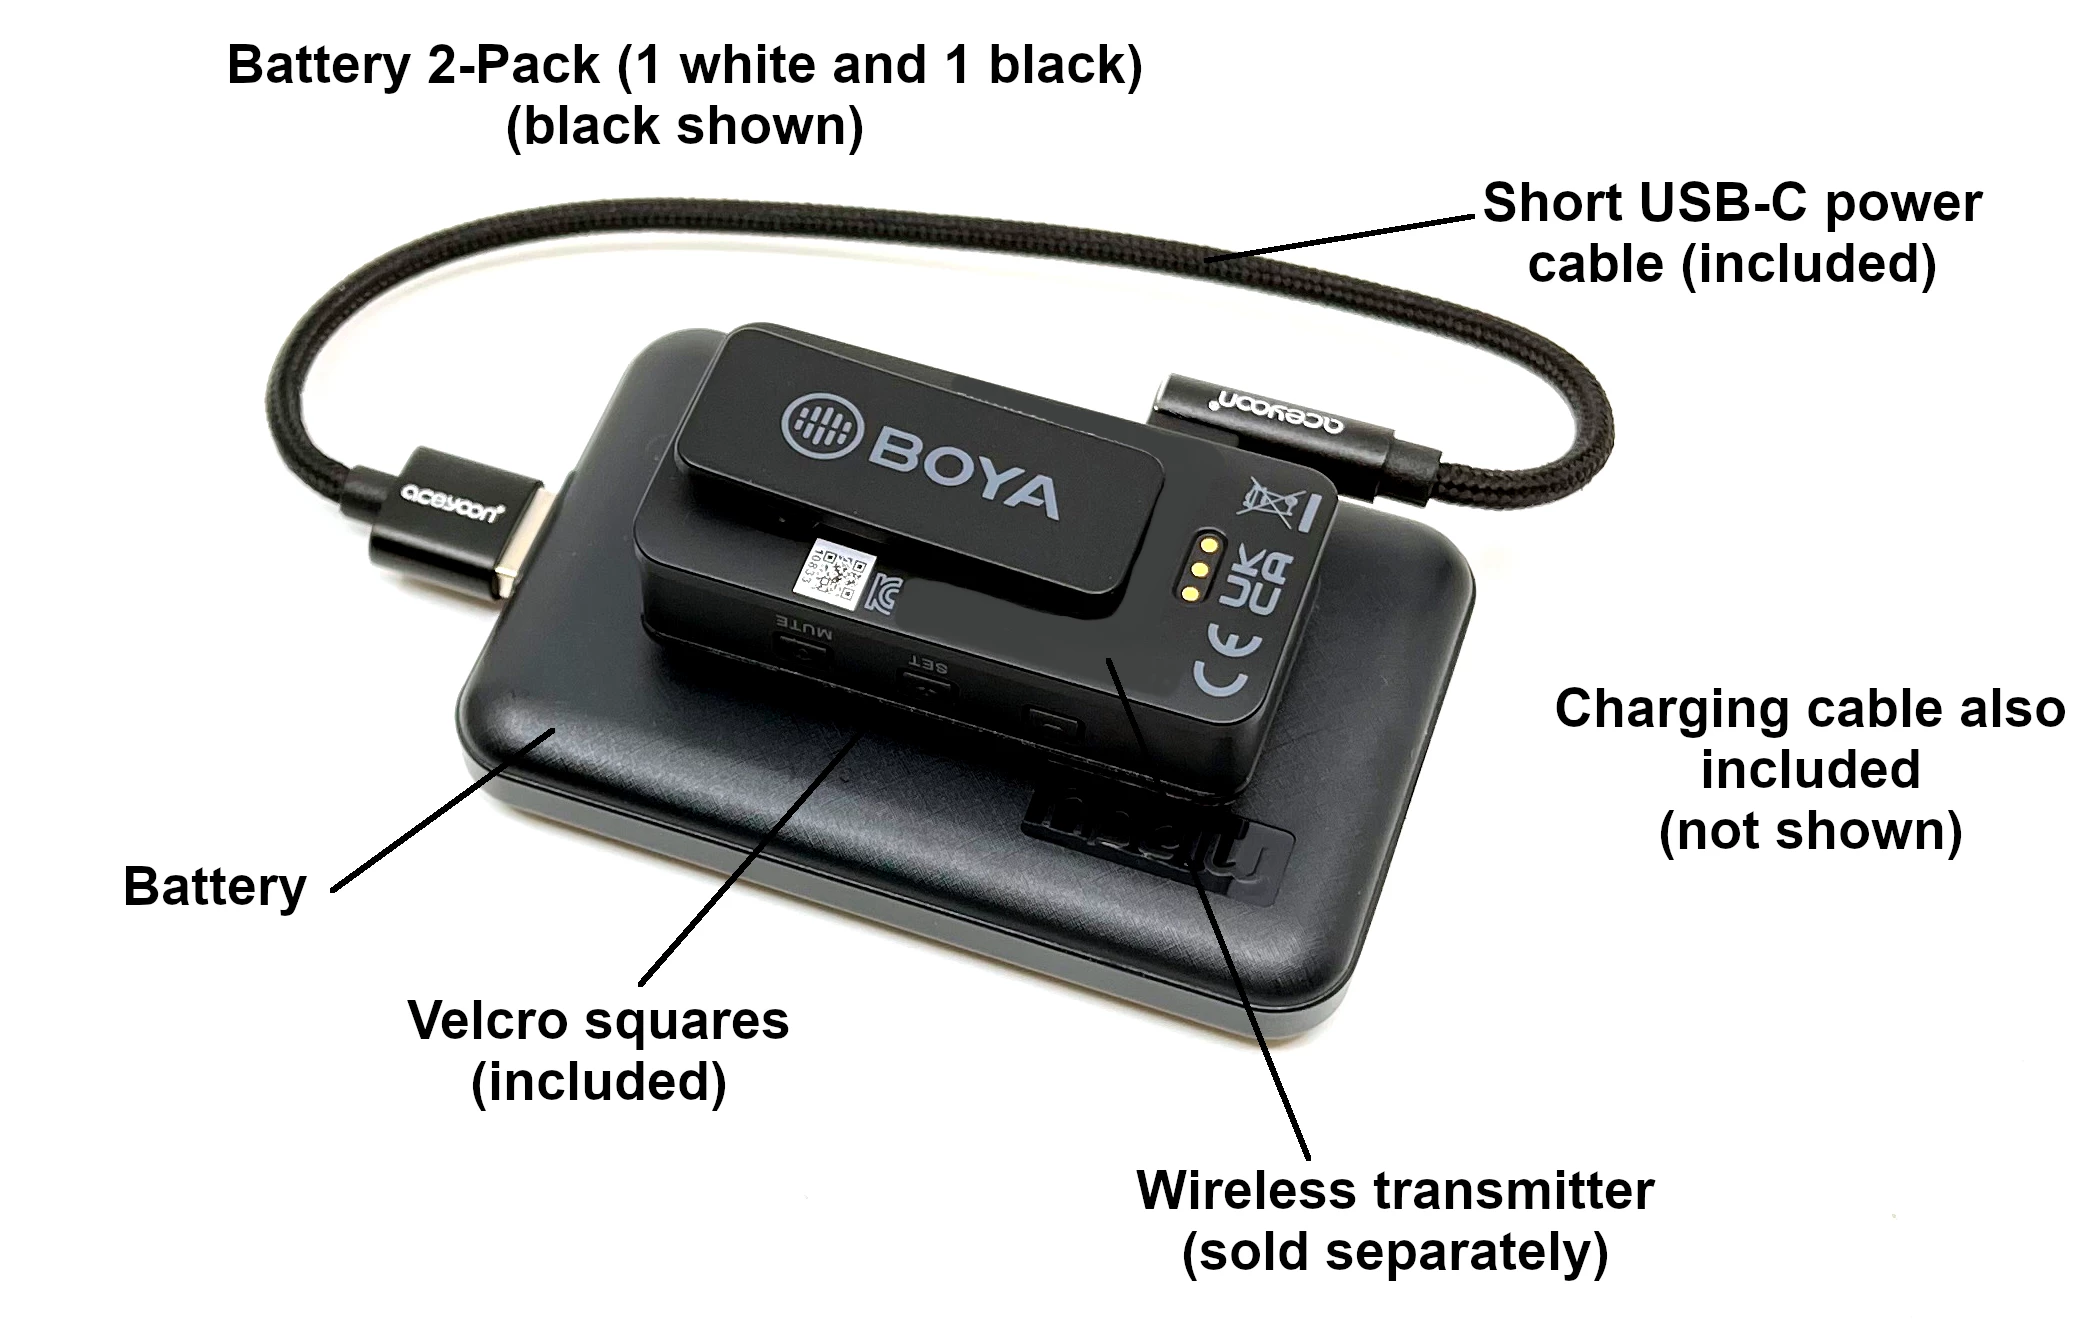 Set of two 65 hour rechargeable power boosters for mini wireless transmitters (Boya, Rode, Luucco) Questions & Answers